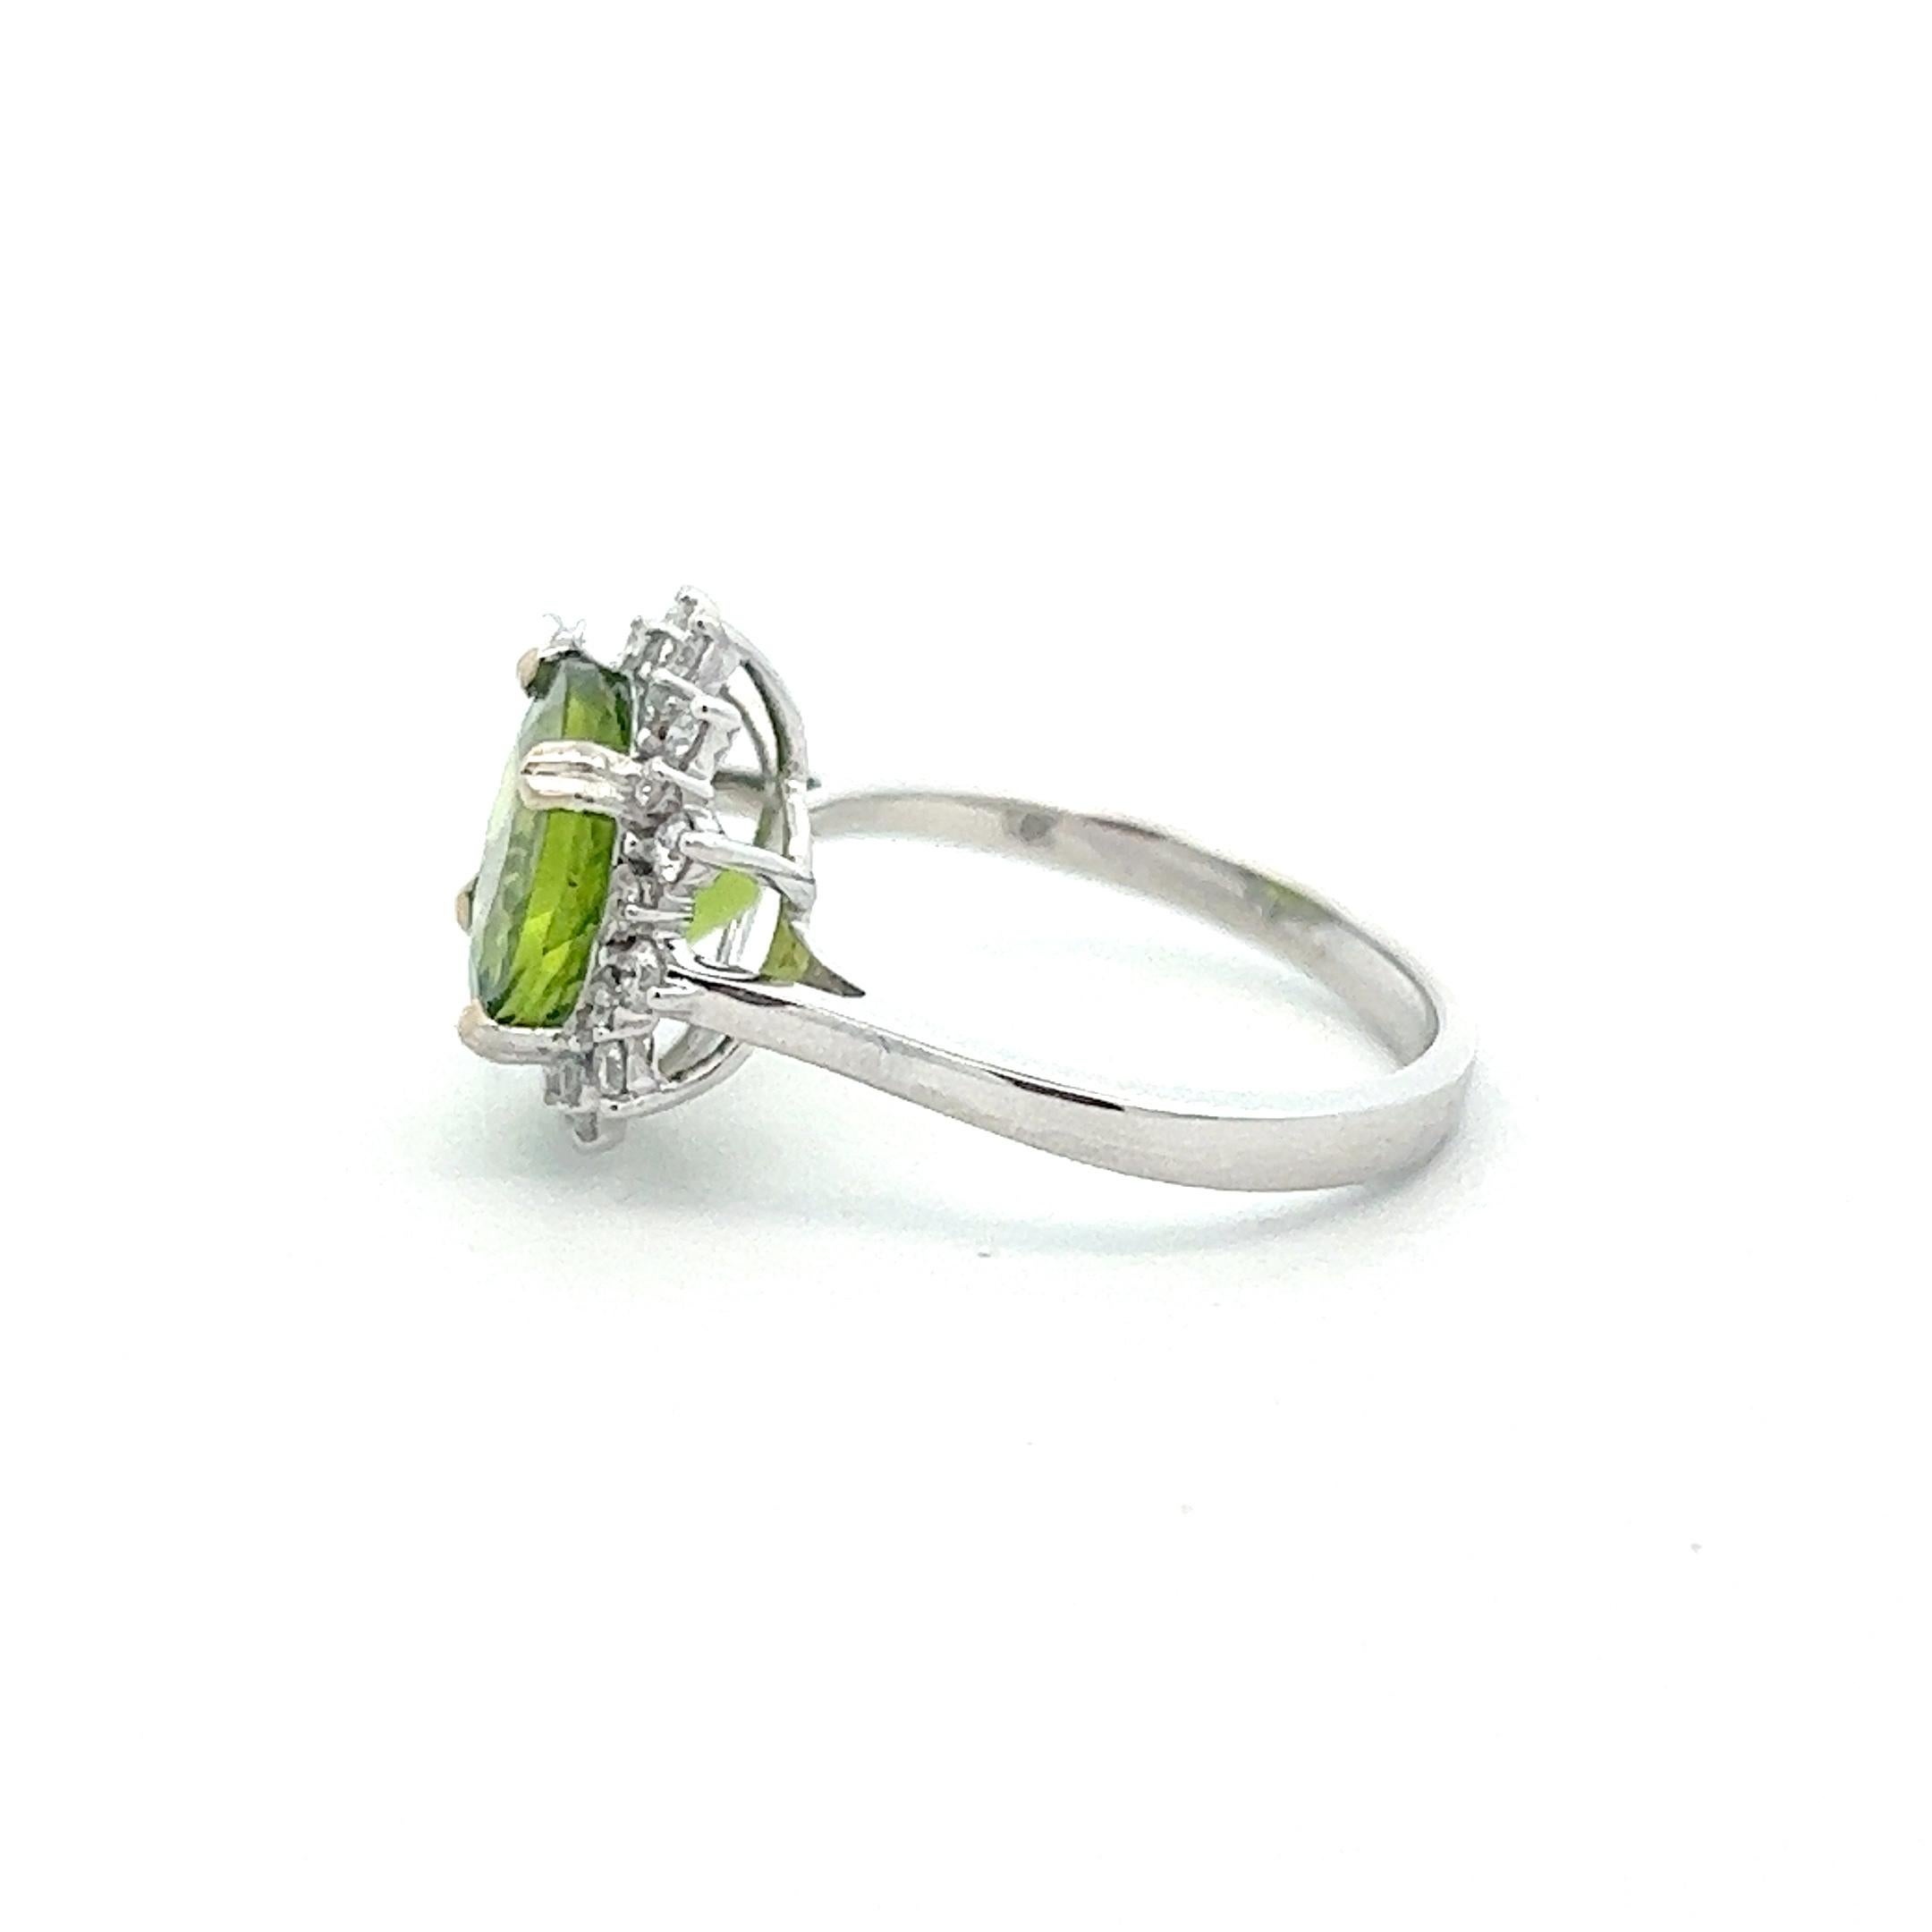 A wonderful 3.24 carat peridot stone set within a halo of diamonds in 14k white gold. The peridot came straight from the Peridot Mesa Gem Mine in Peridot, Arizona and has a unique round cut that reflects light well. The ring is brand new and a size